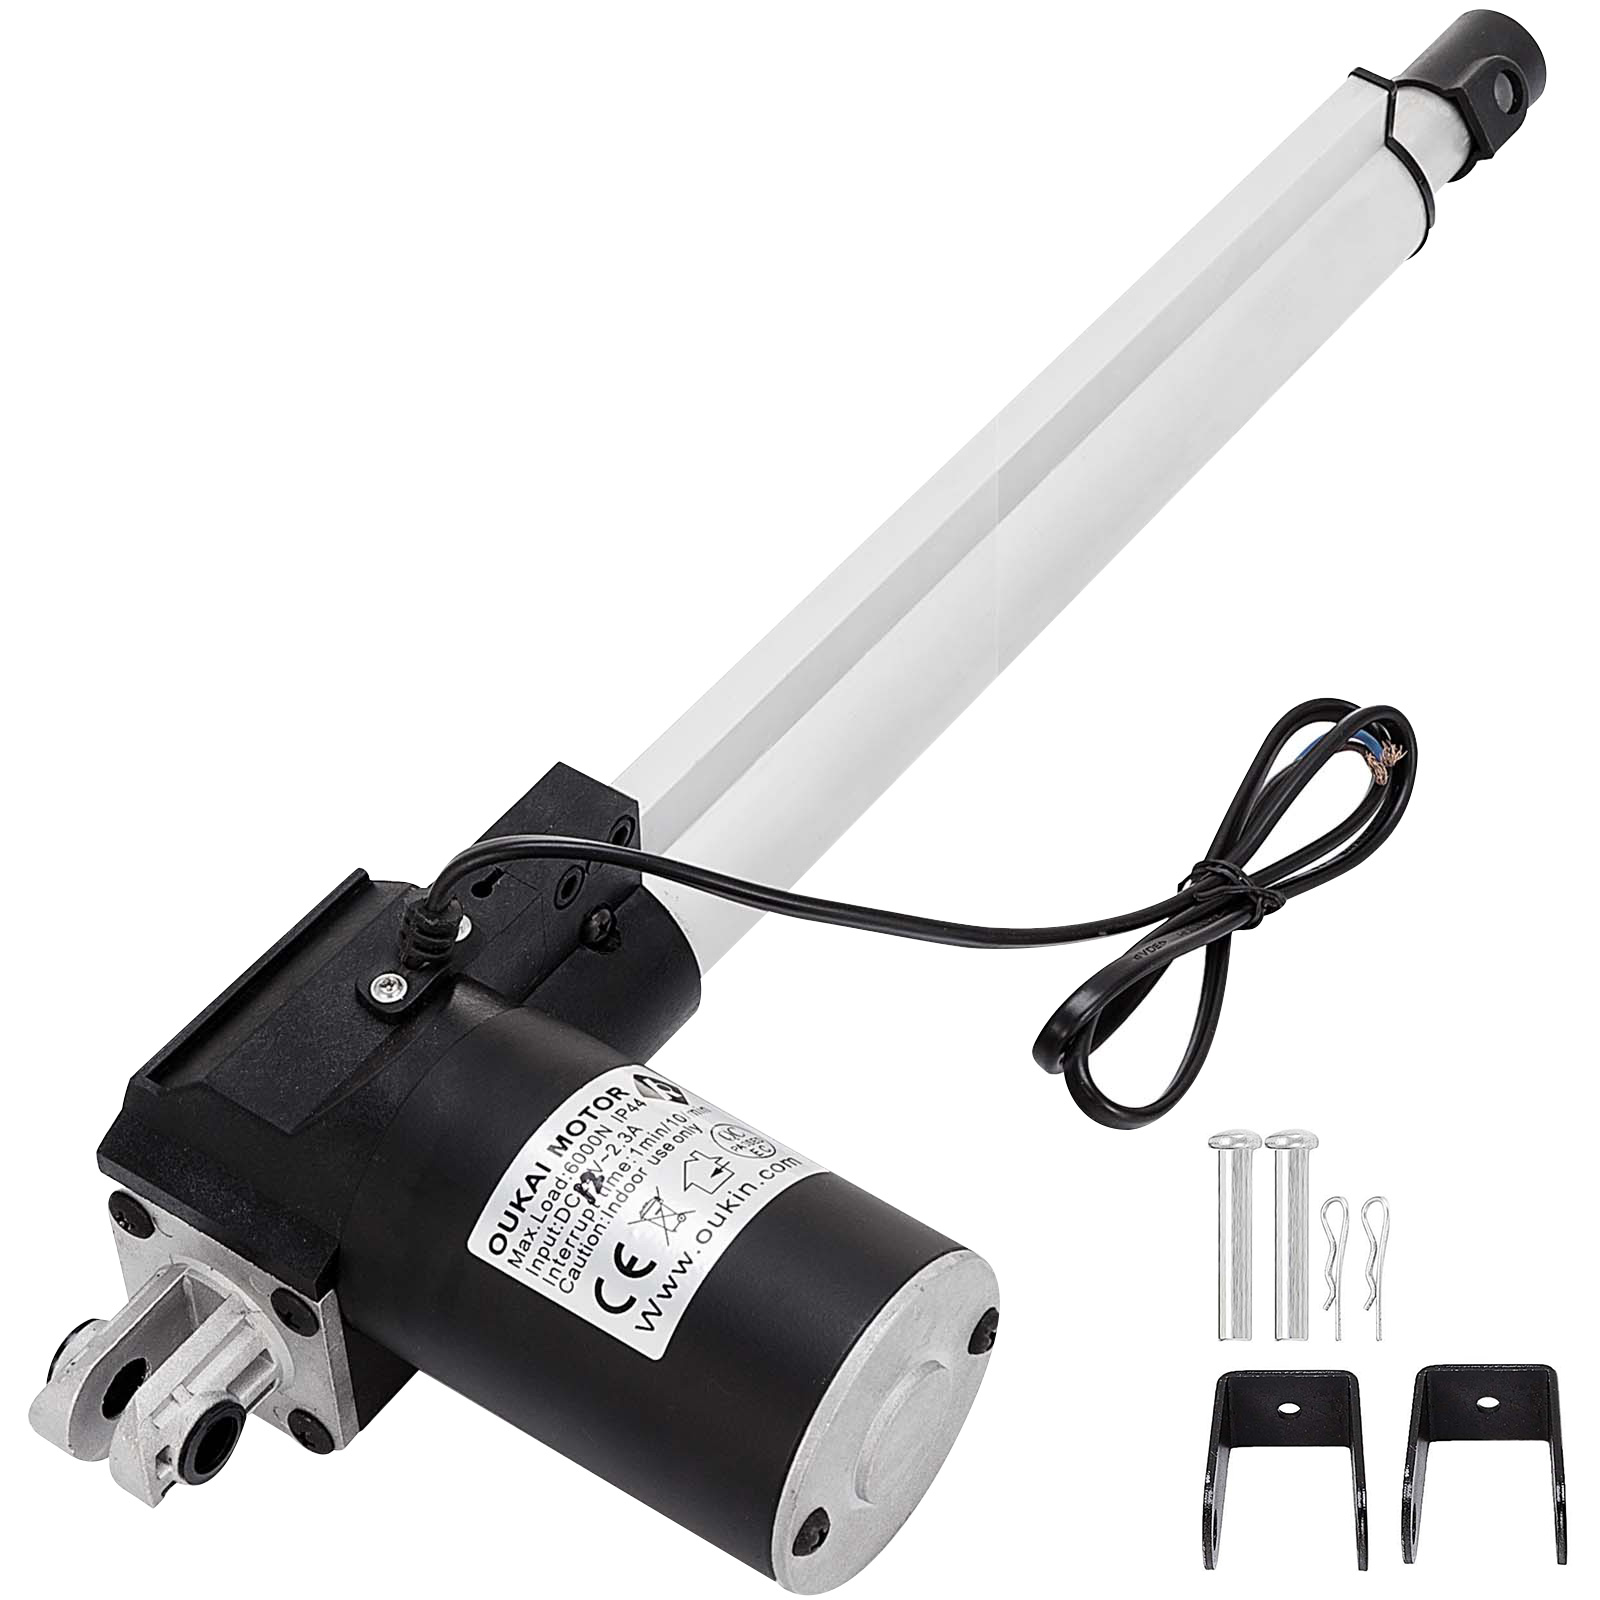 Details about   20"inch Stroke Linear Electric Actuator DC12V 900N/225lbs Maximum Lift 10mm/s 